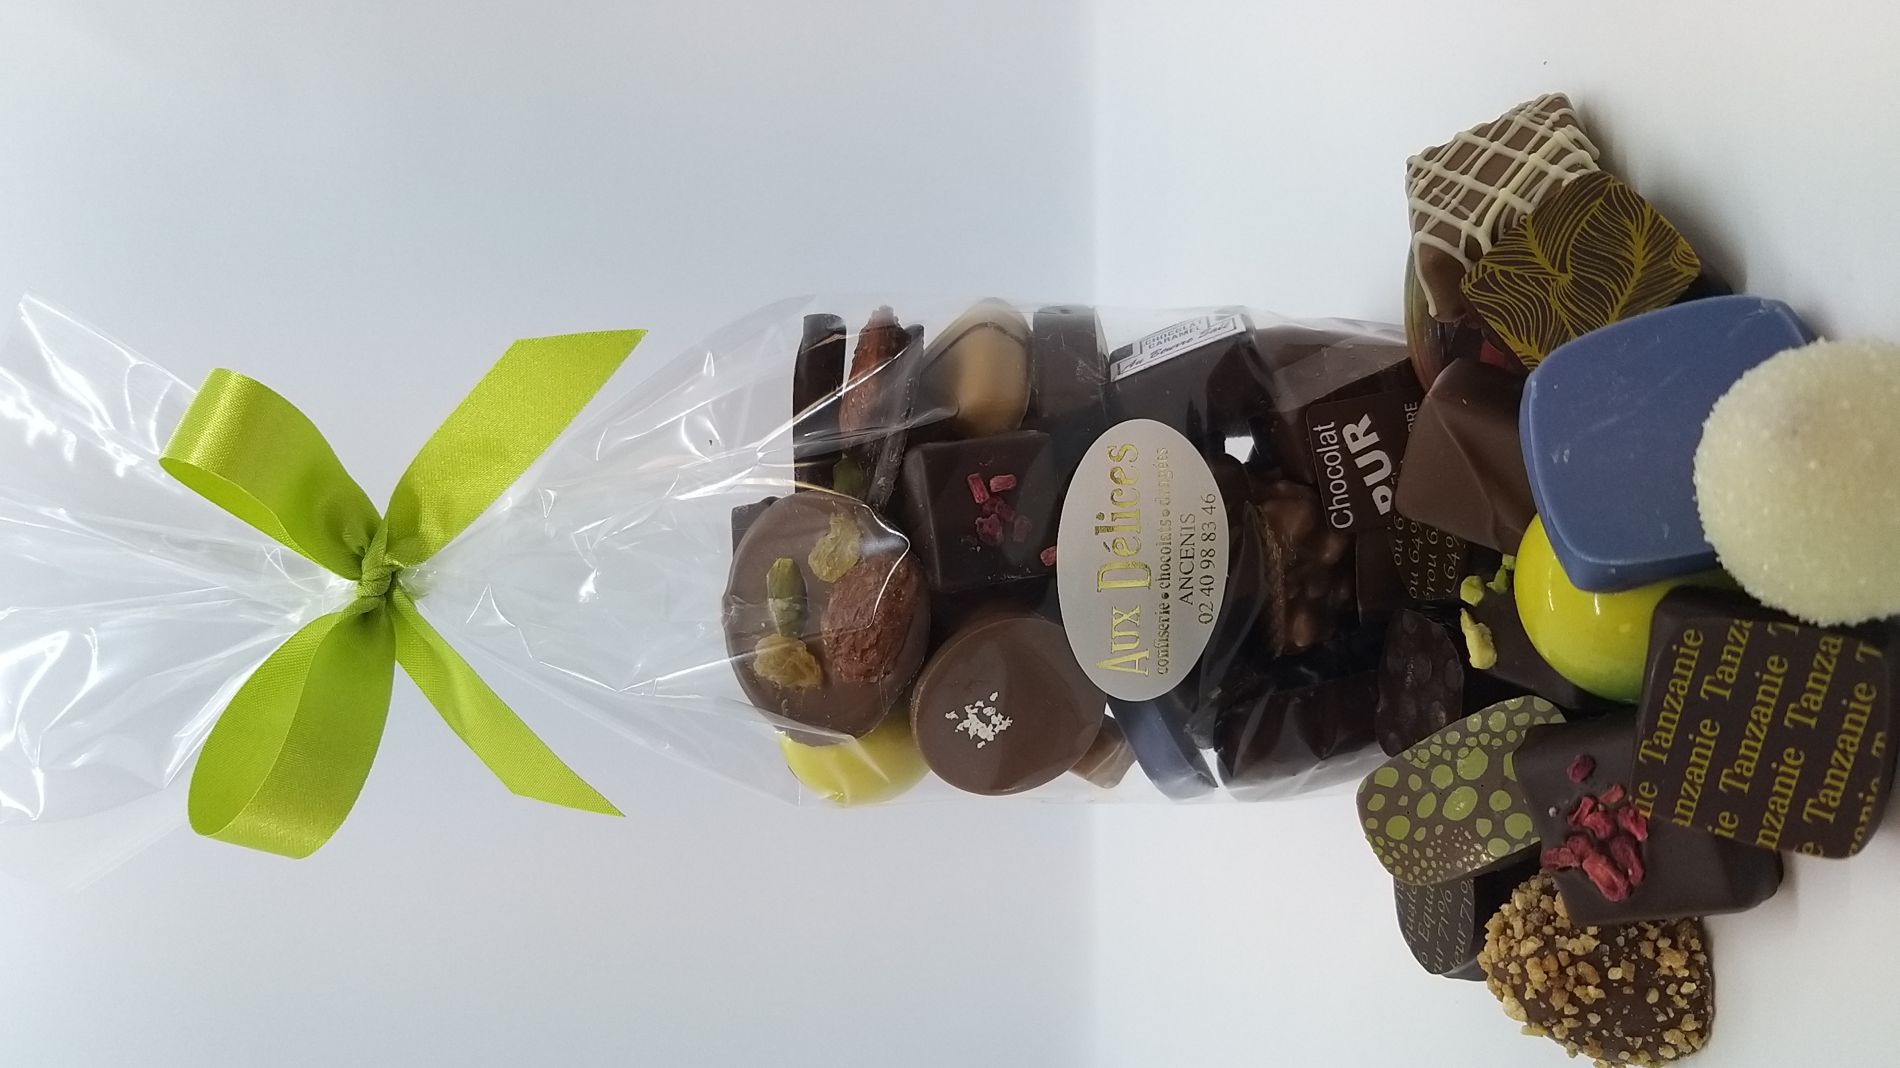 https://www.confiserie-auxdelices.com/fpdb/1641421-chocolat200g.jpg